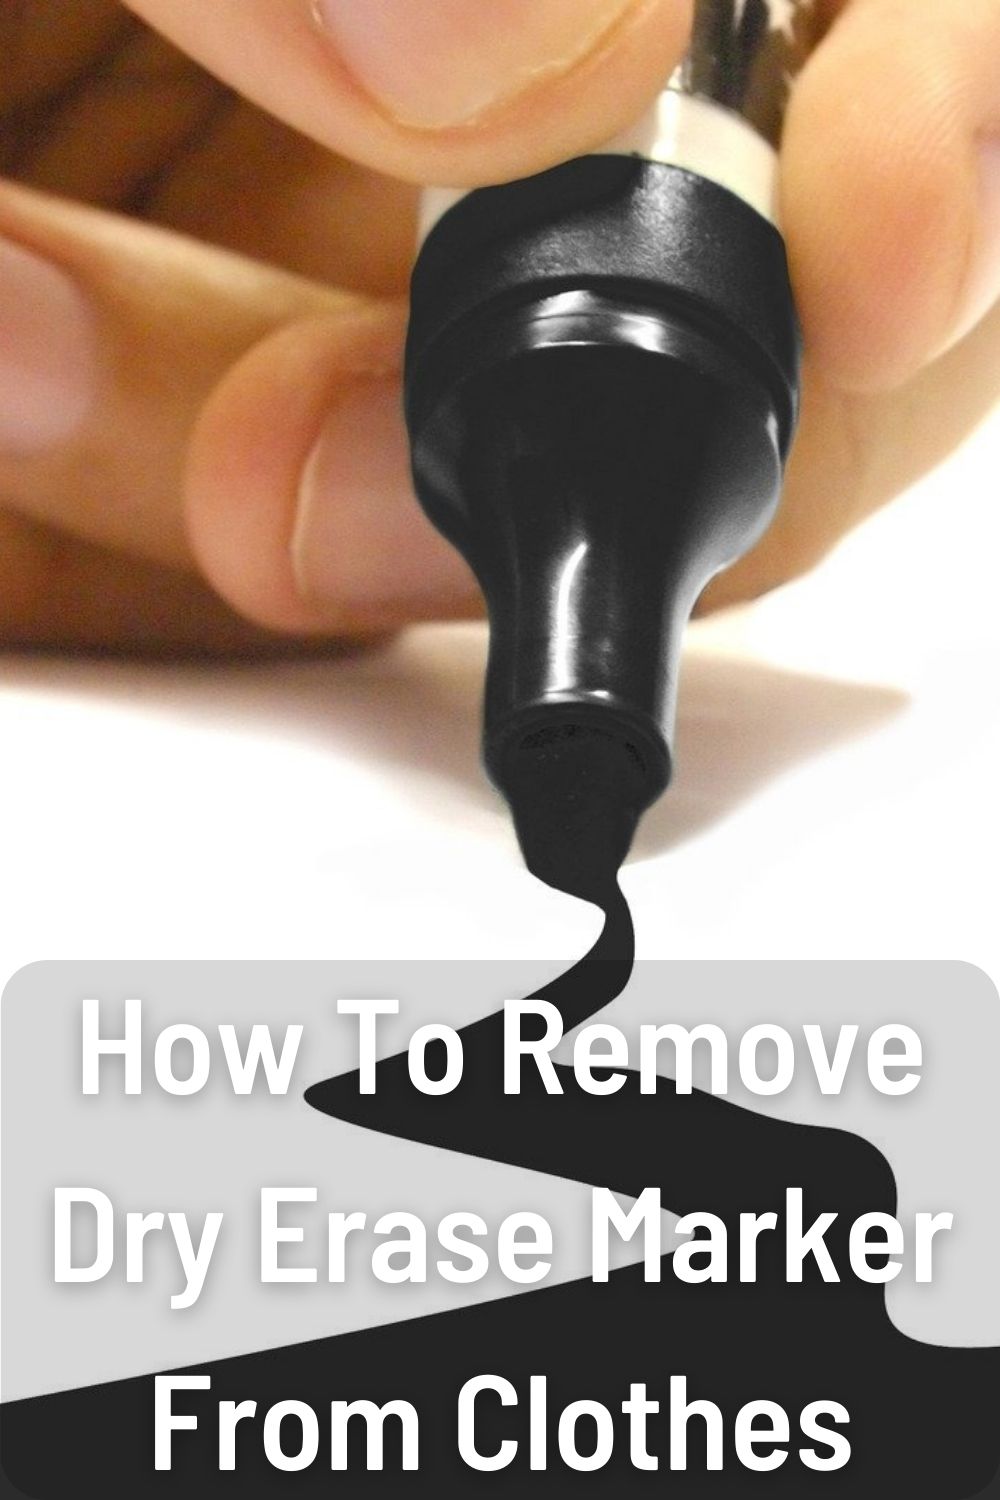 How To Remove Dry Erase Marker From Clothes